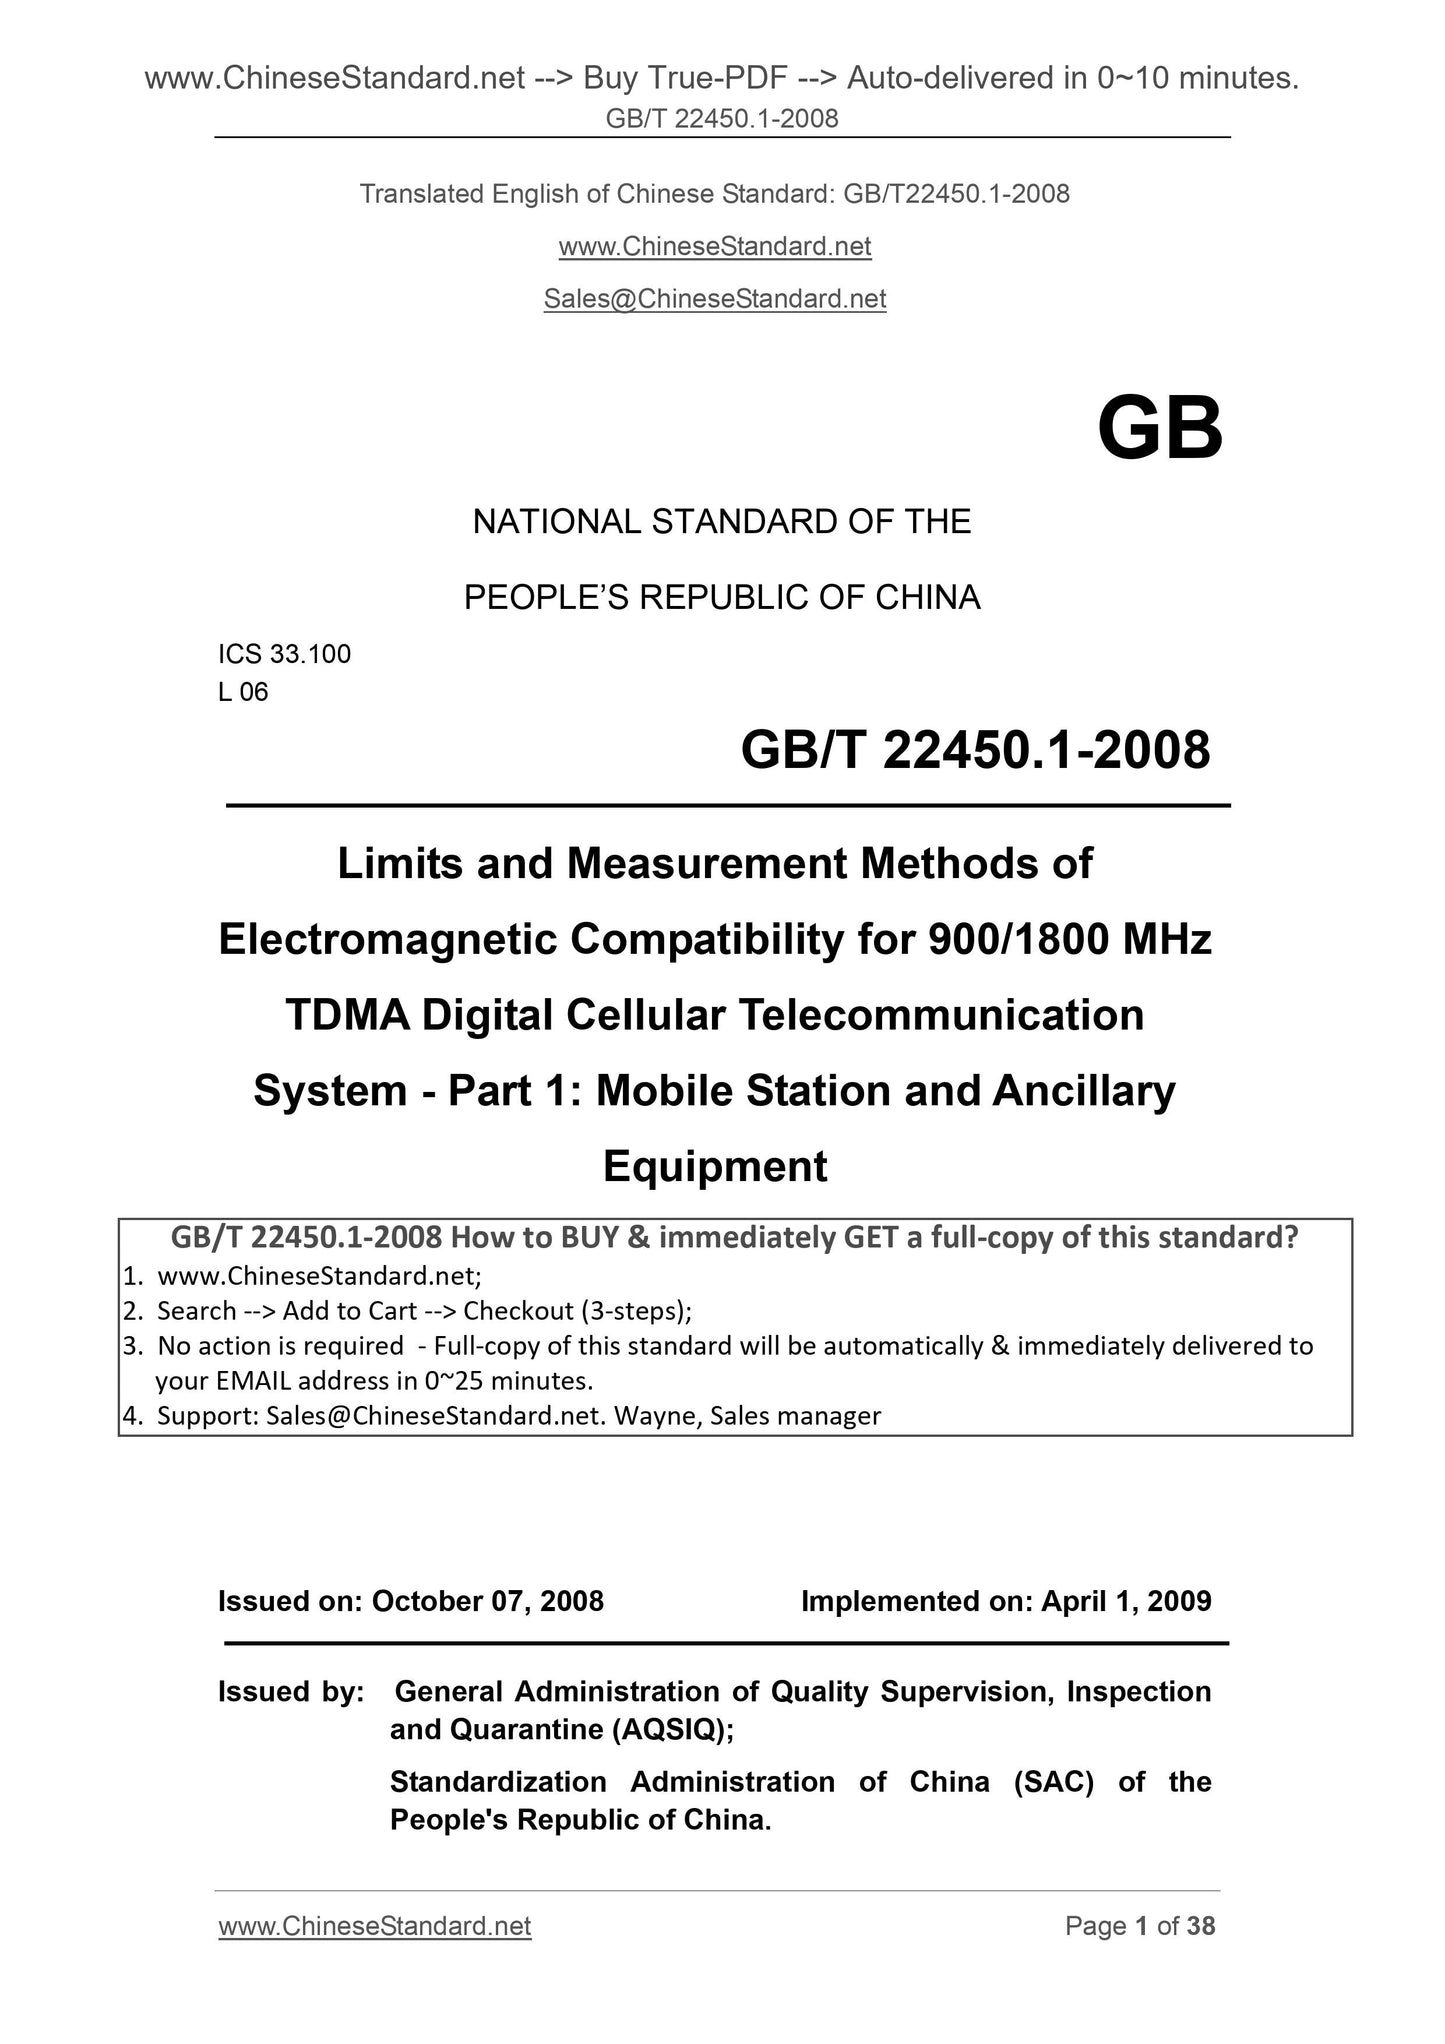 GB/T 22450.1-2008 Page 1